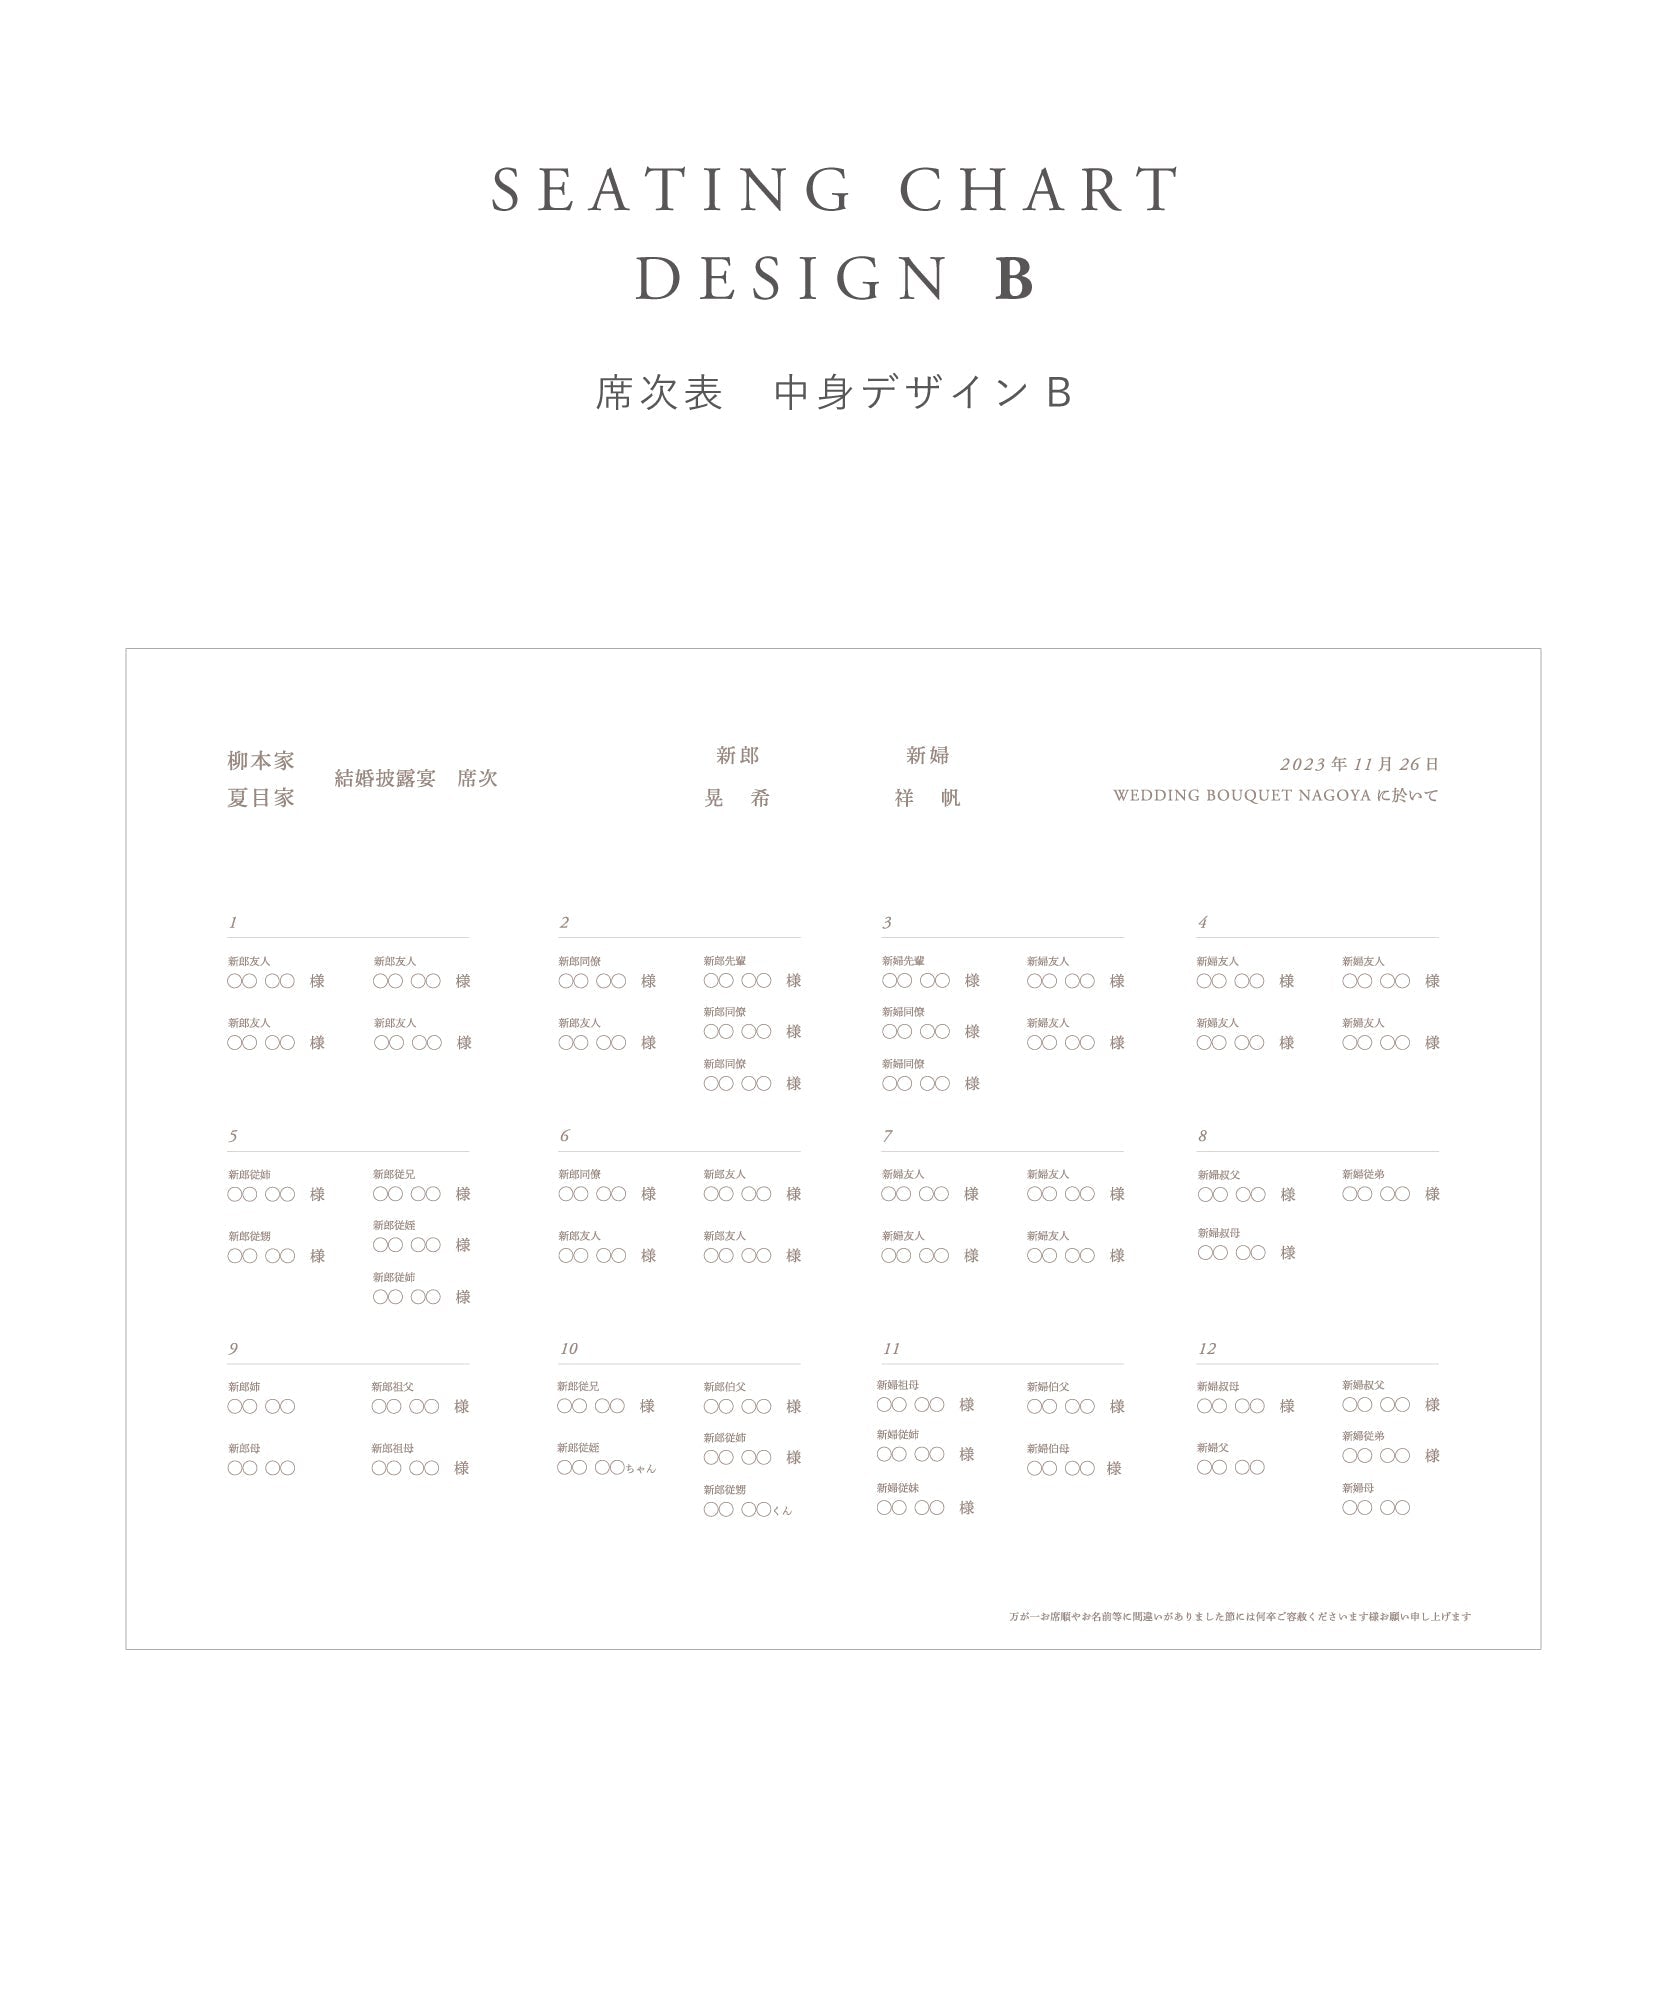 FLORAL SEATING CHART CARDS お花の席次表 コットンペーパー